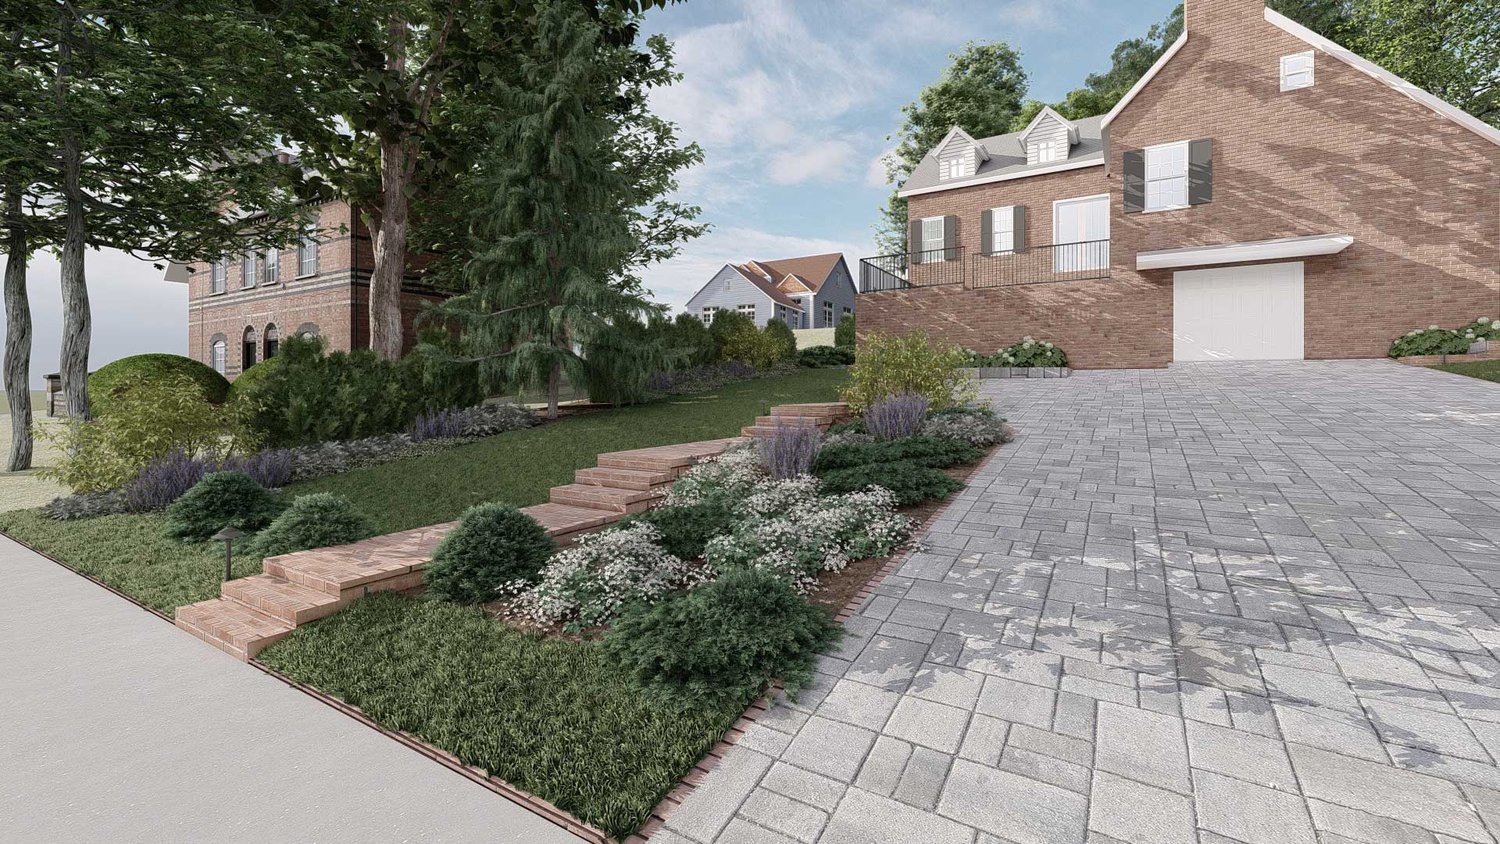 Long Island part front yard with concrete paver driveway and lawn with concrete paver stairway, trees and plants